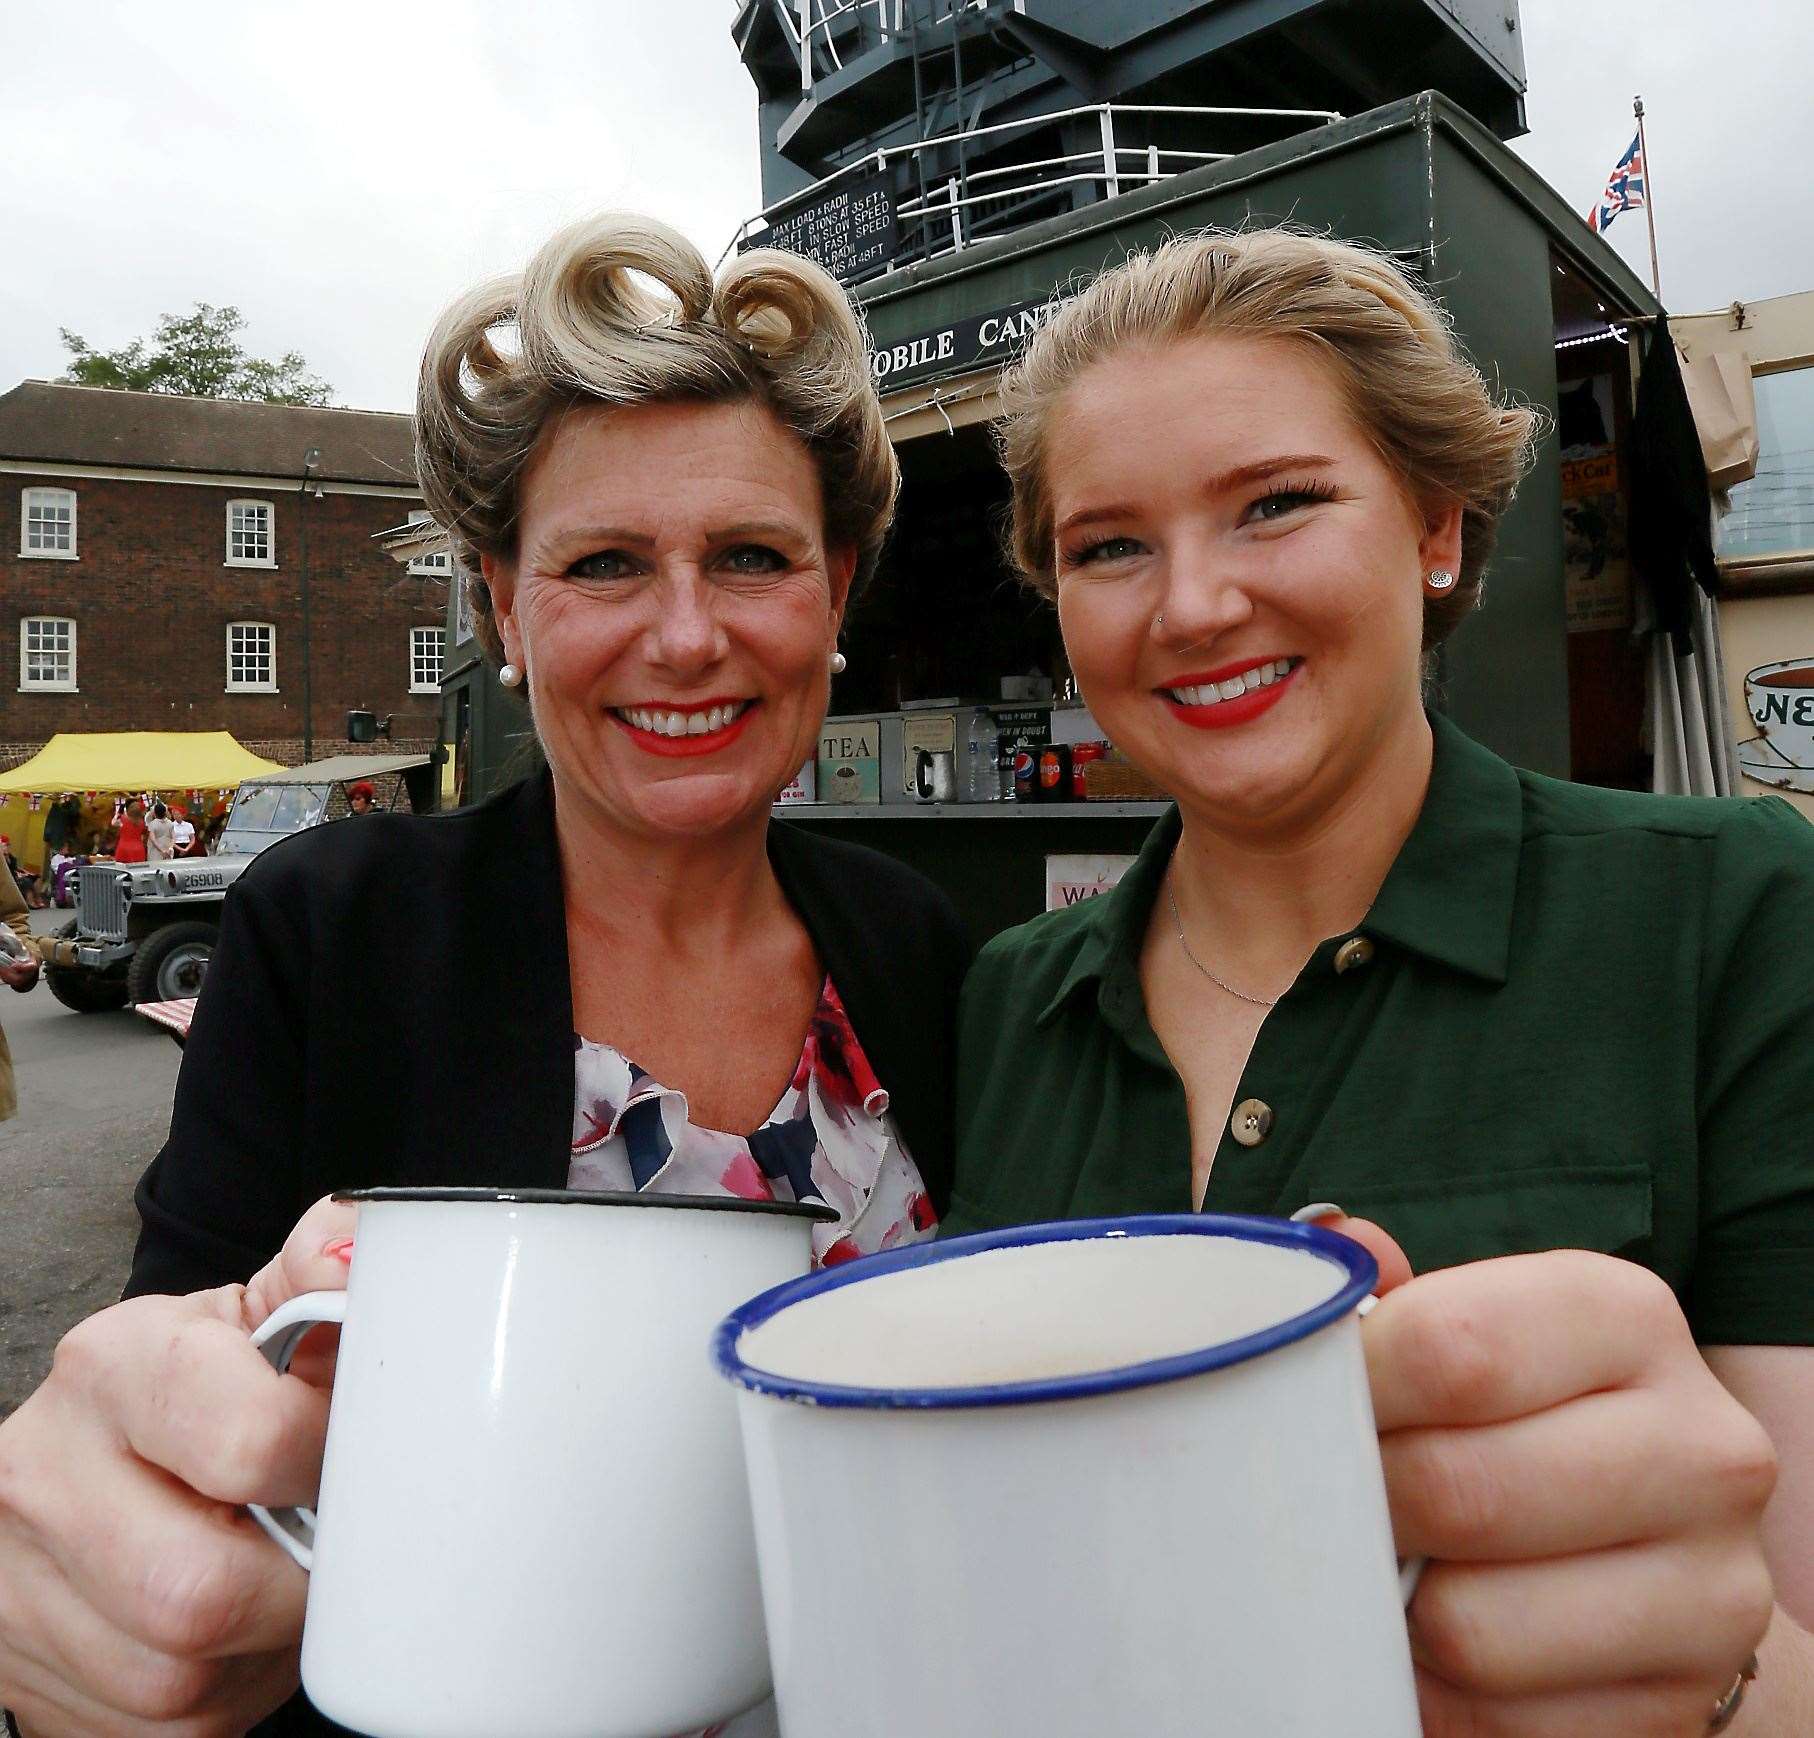 Have fun with the 40s at the Historic Dockyard Chatham. Pictured - Joanne Butler (left) and Jayme Goodger in a previous year Picture: Phil Lee